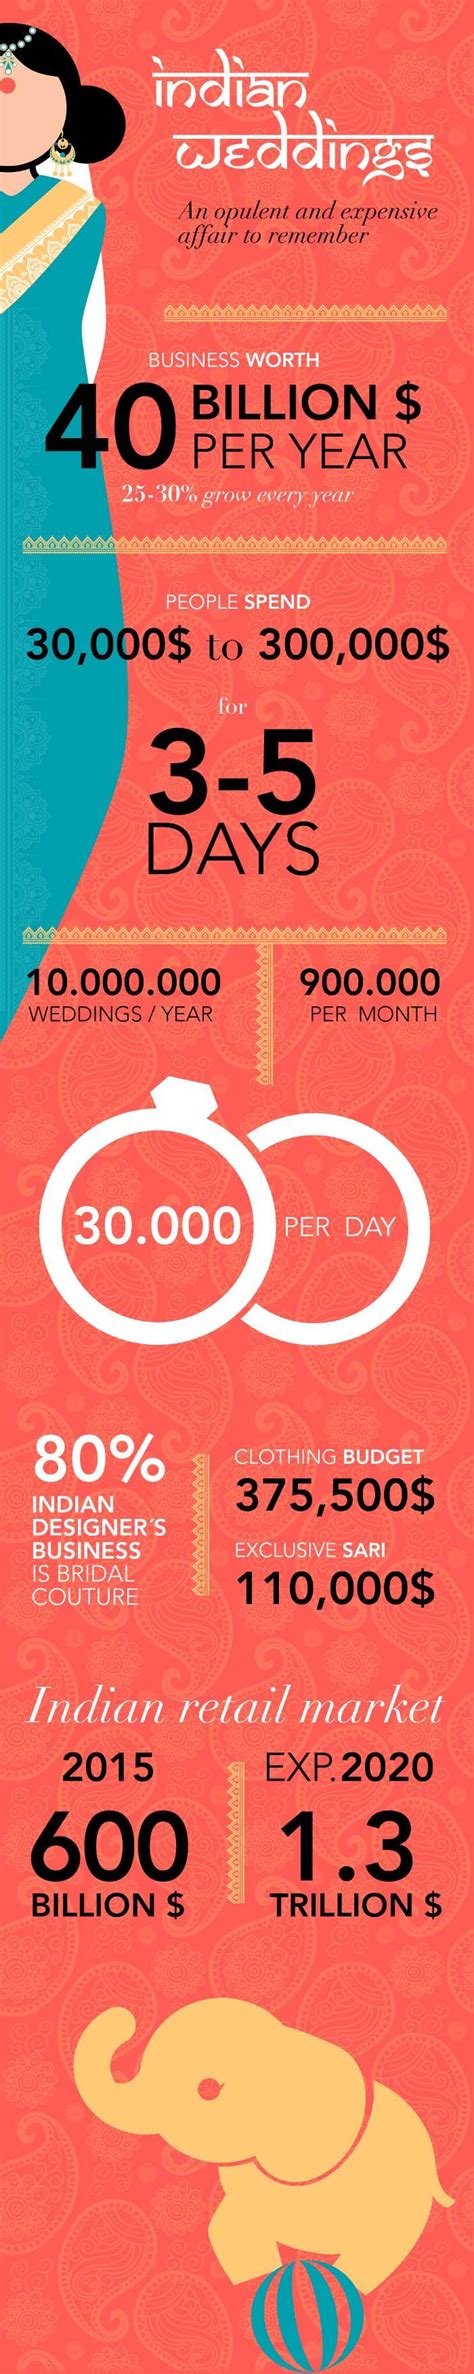 Infographic Indian Weddings An Opulent And Expensive Affair To